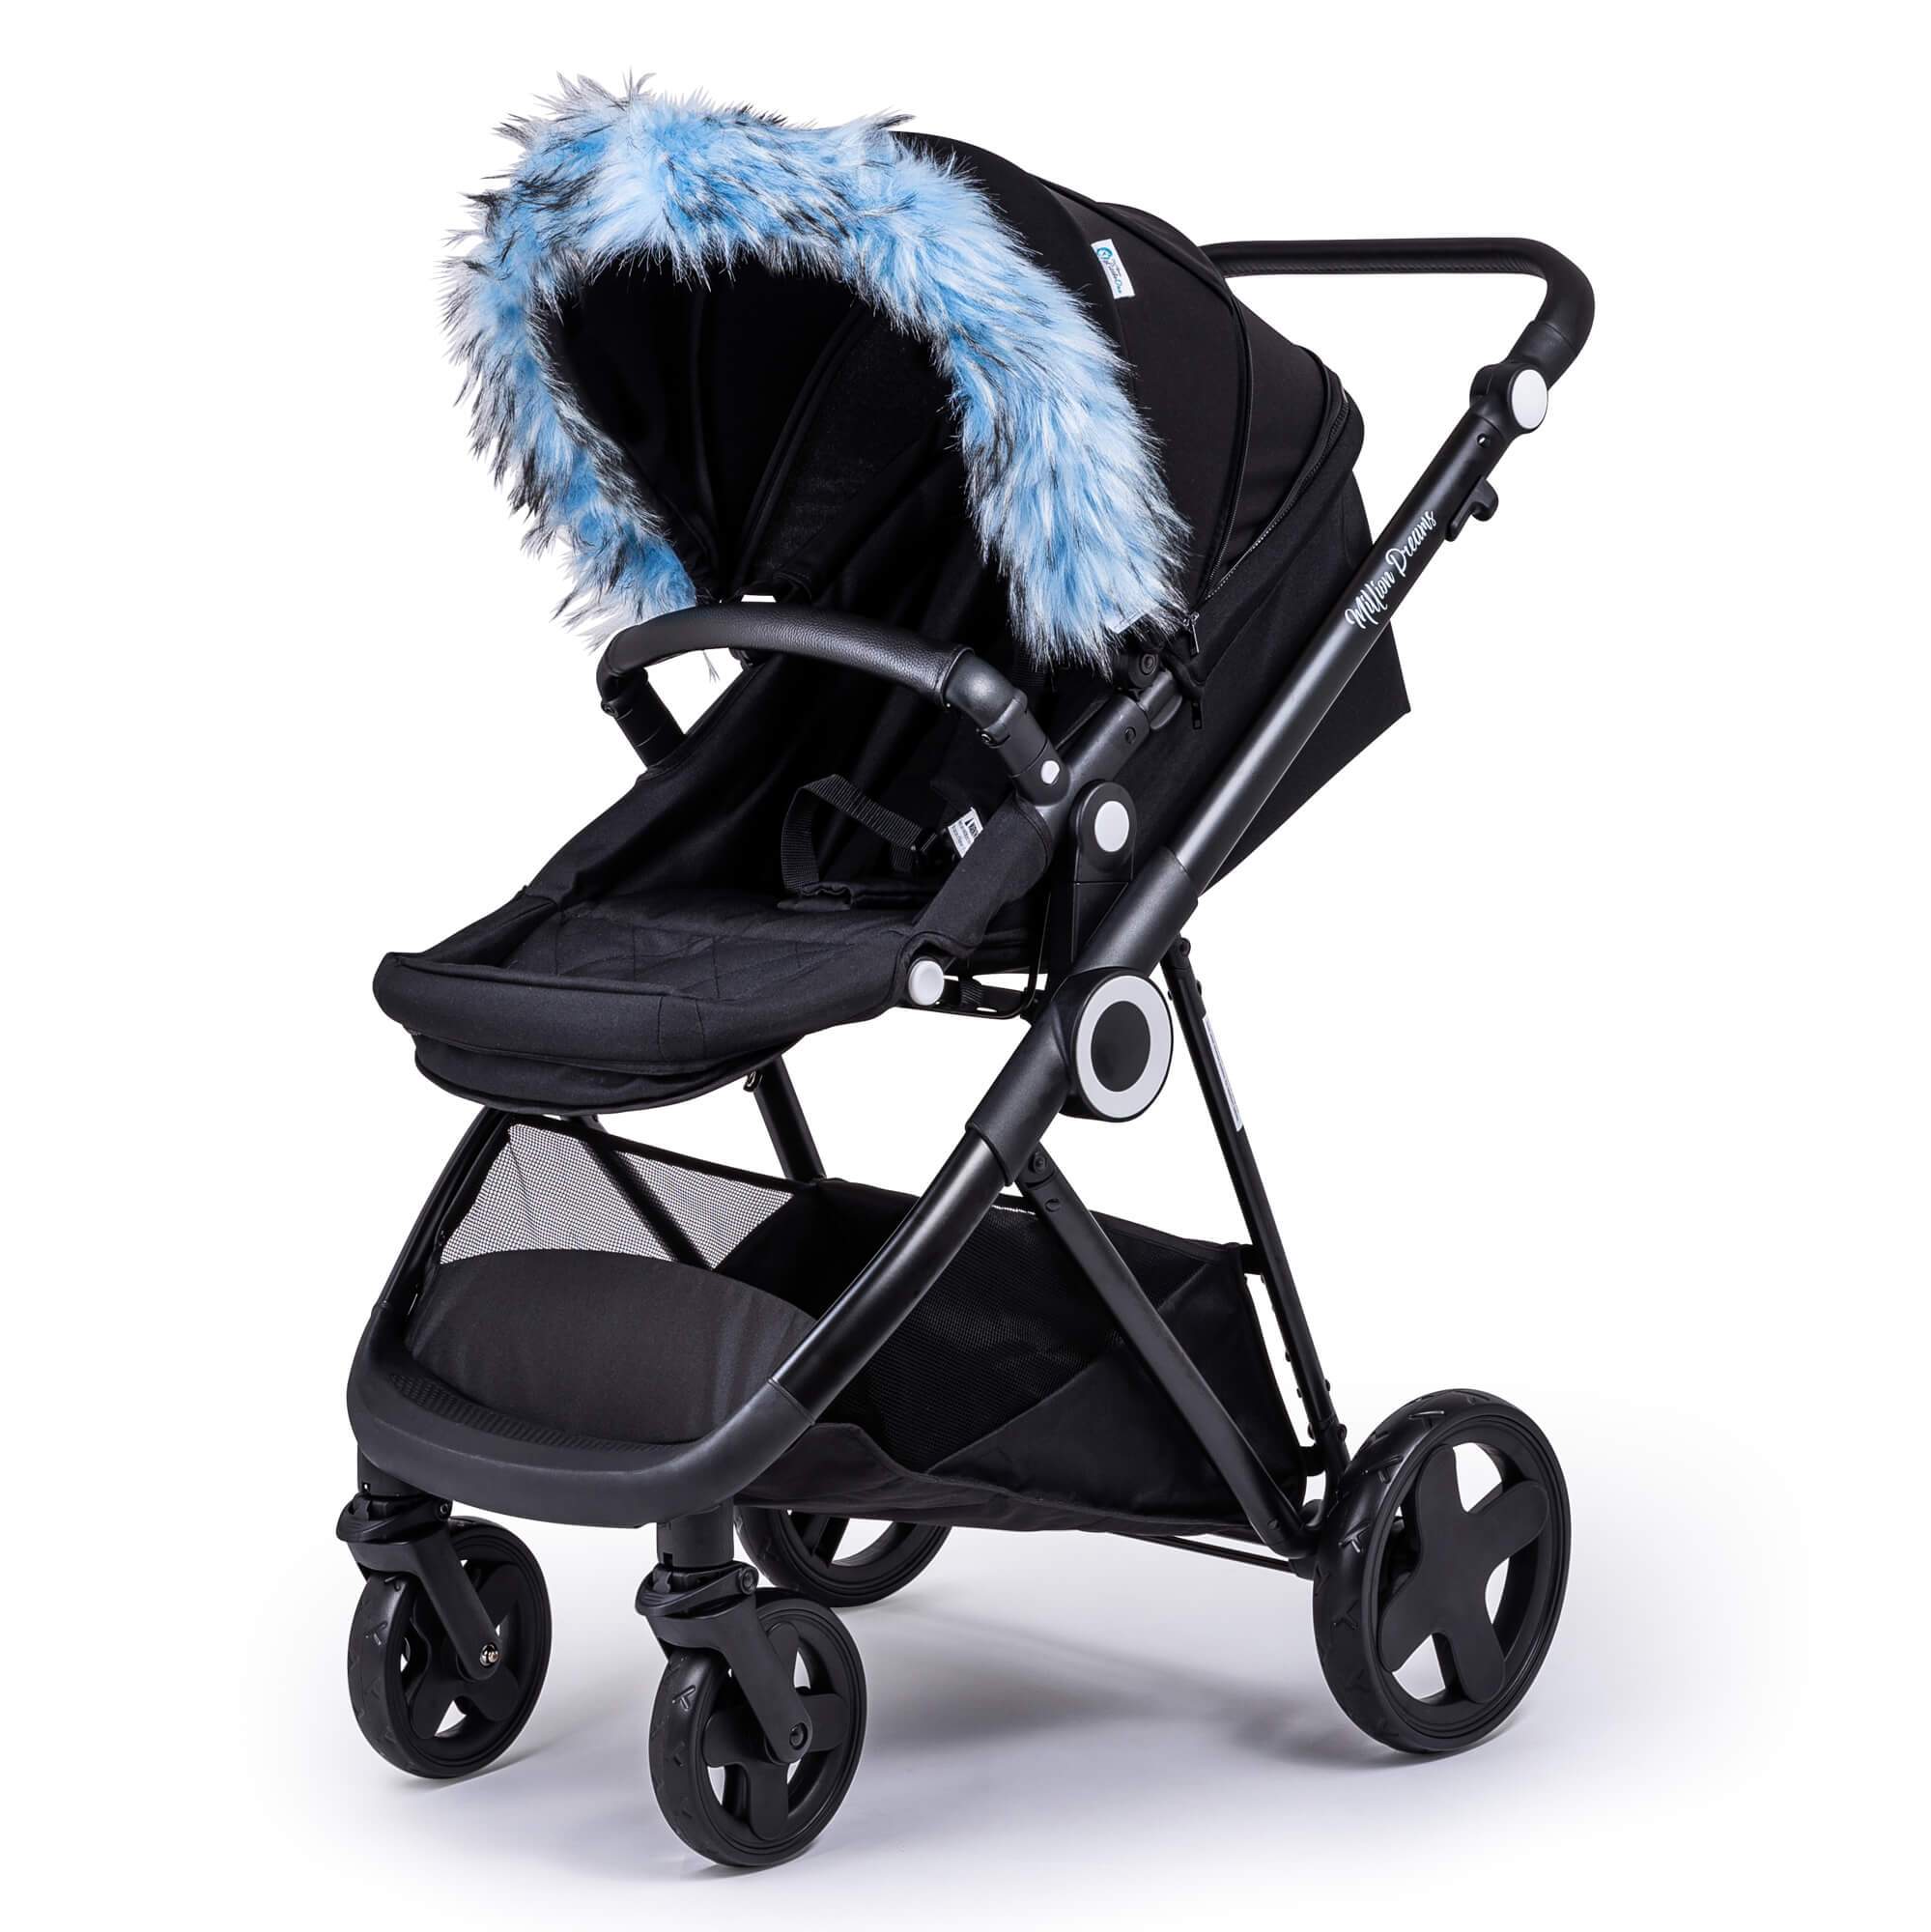 Pram Fur Hood Trim Attachment for Pushchair Compatible with Maclaren - Light Blue / Fits All Models | For Your Little One